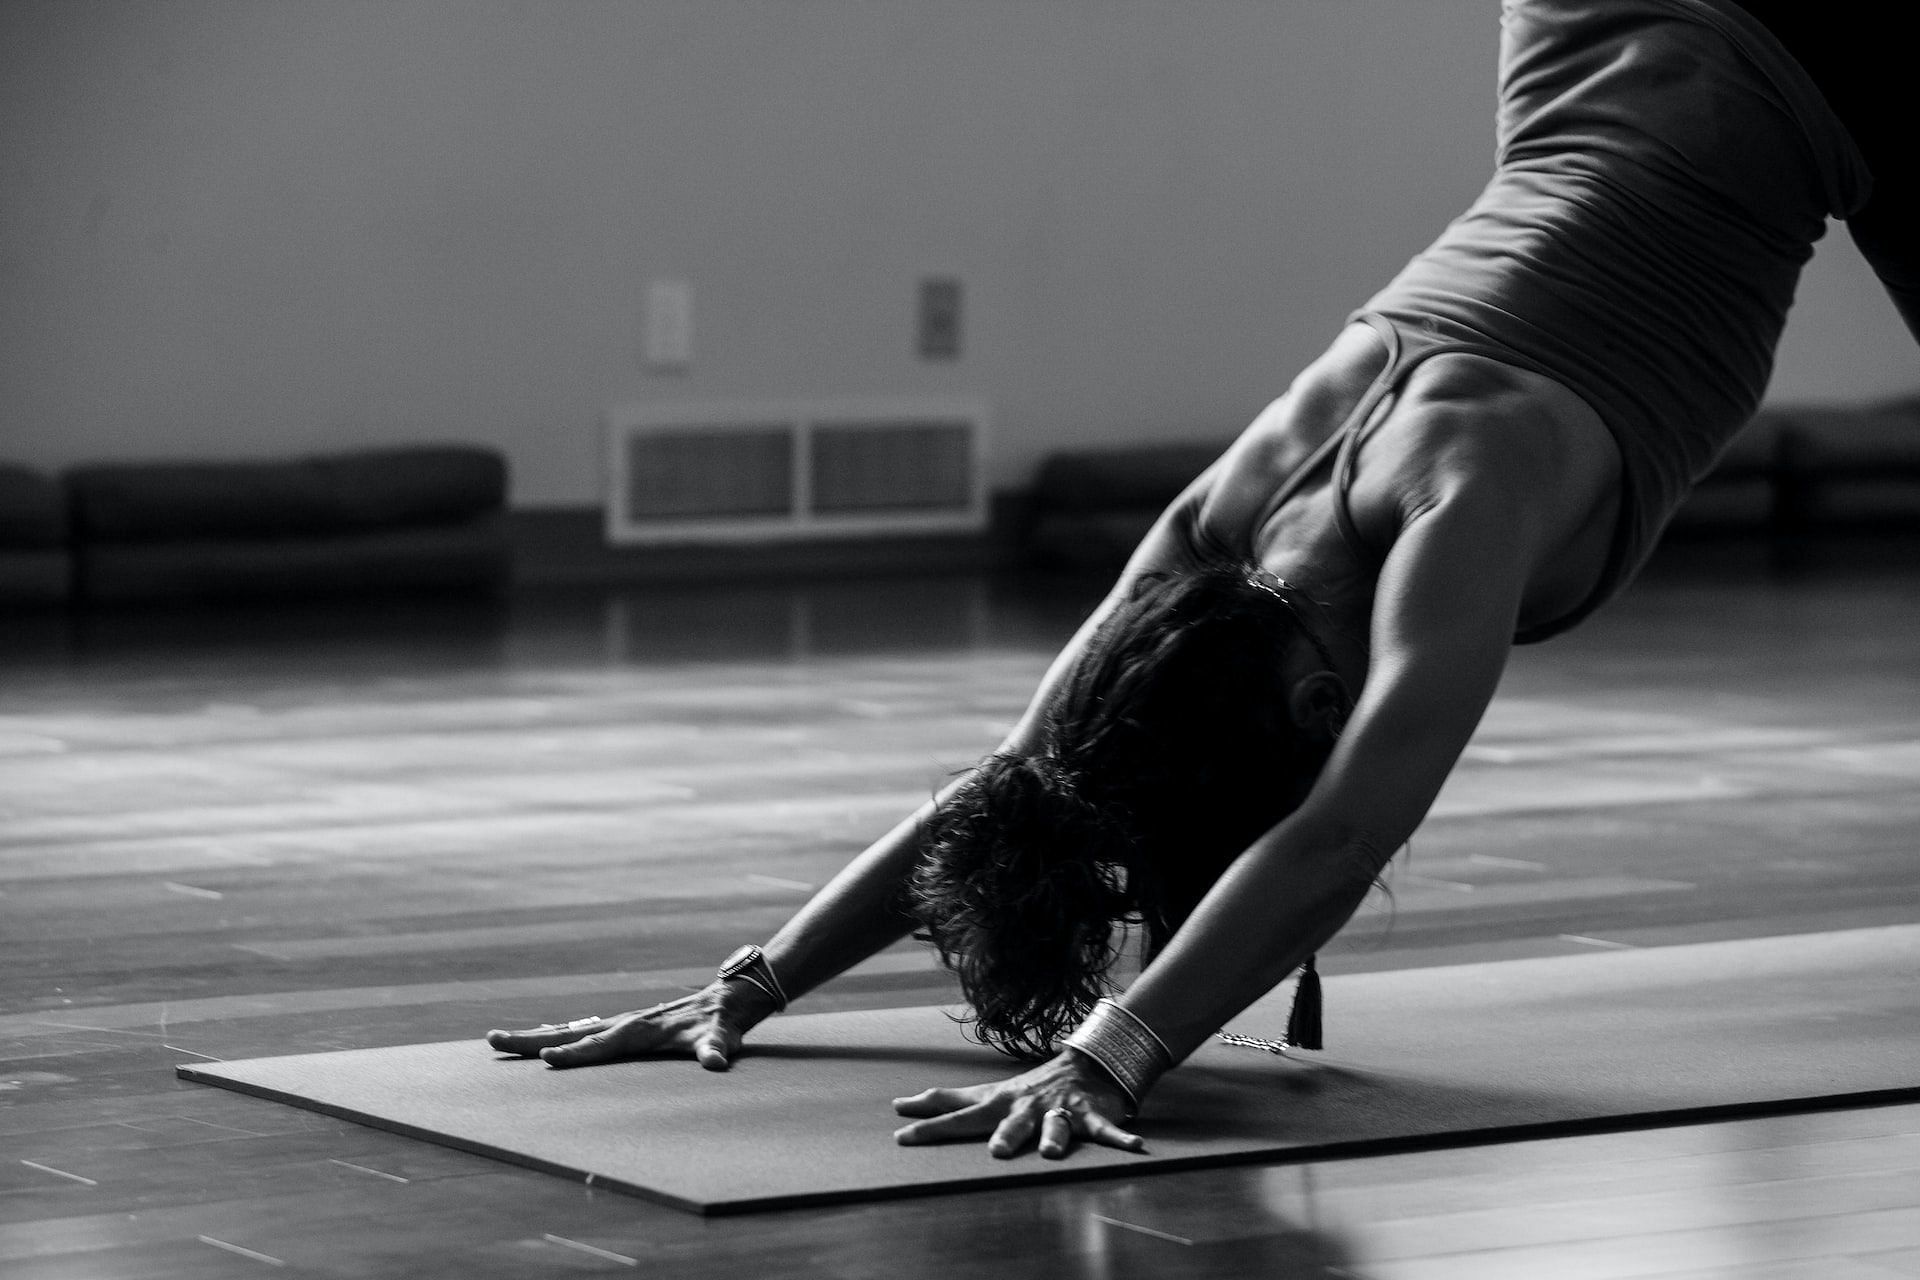 Yoga exercises can help prevent carpal tunnel syndrome. (Photo via Pexels/Ginny Rose Stewart)